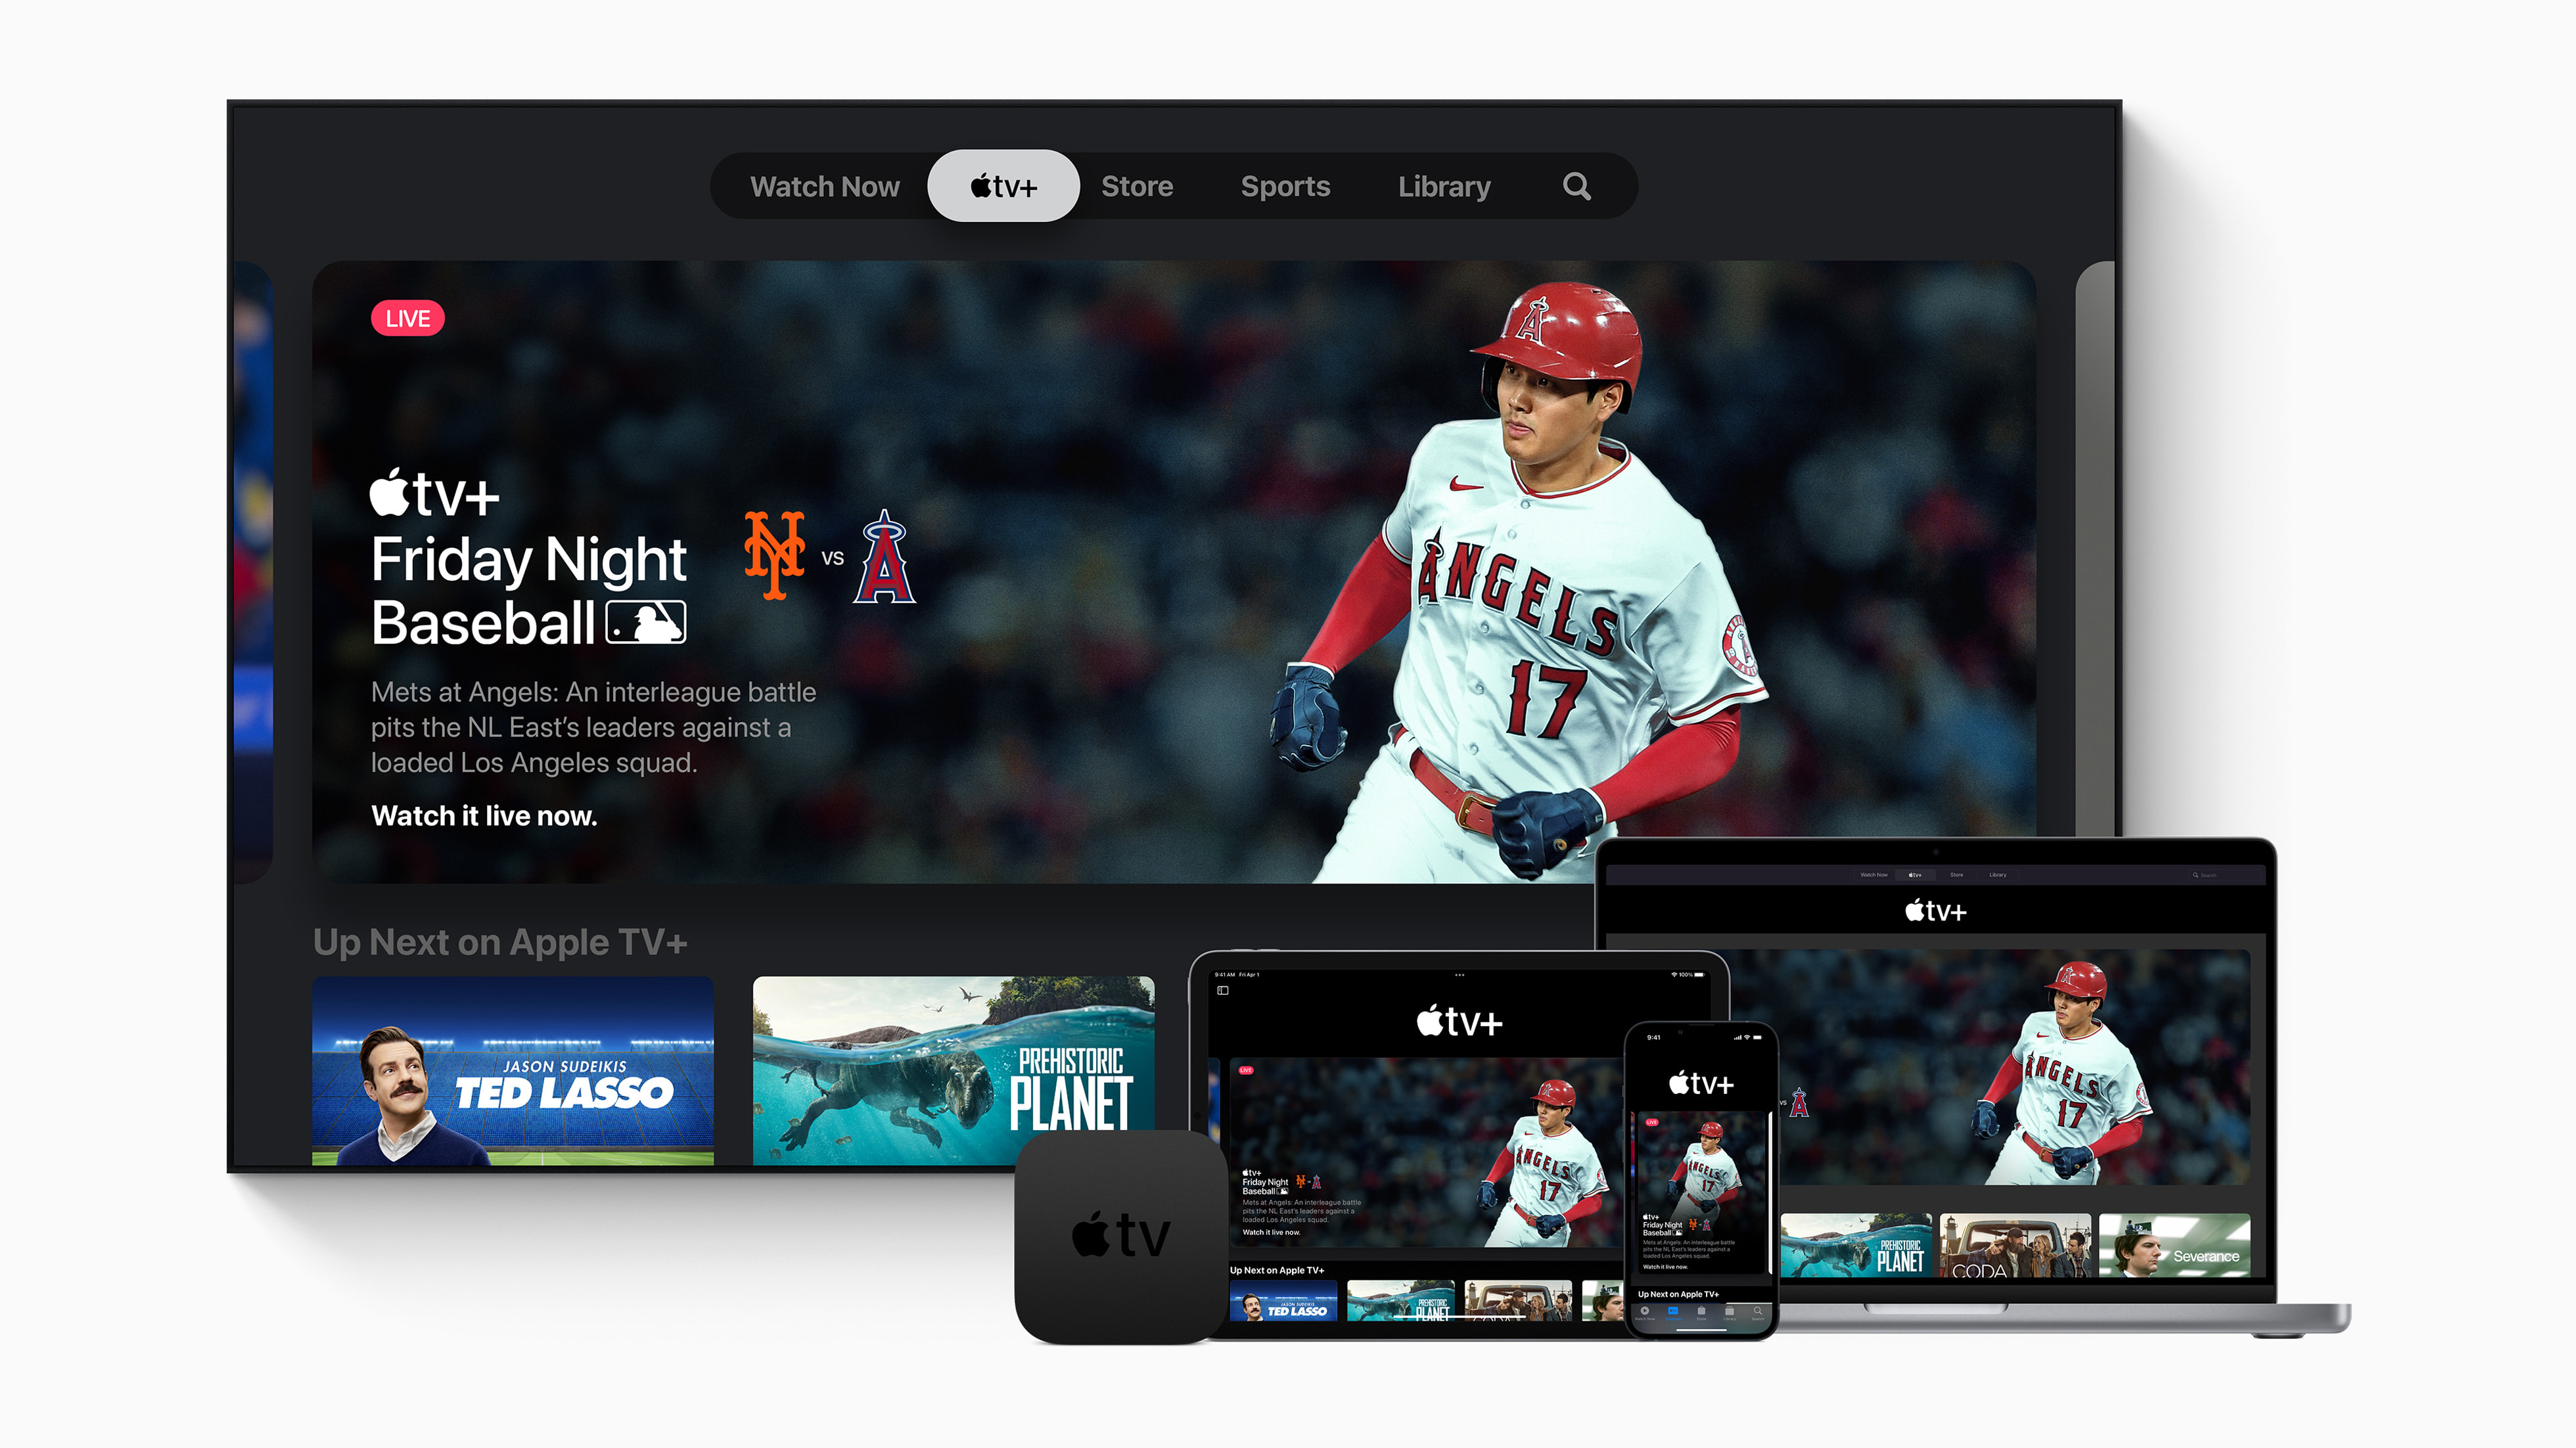 Apple and Major League Baseball announce July “Friday Night Baseball” schedule